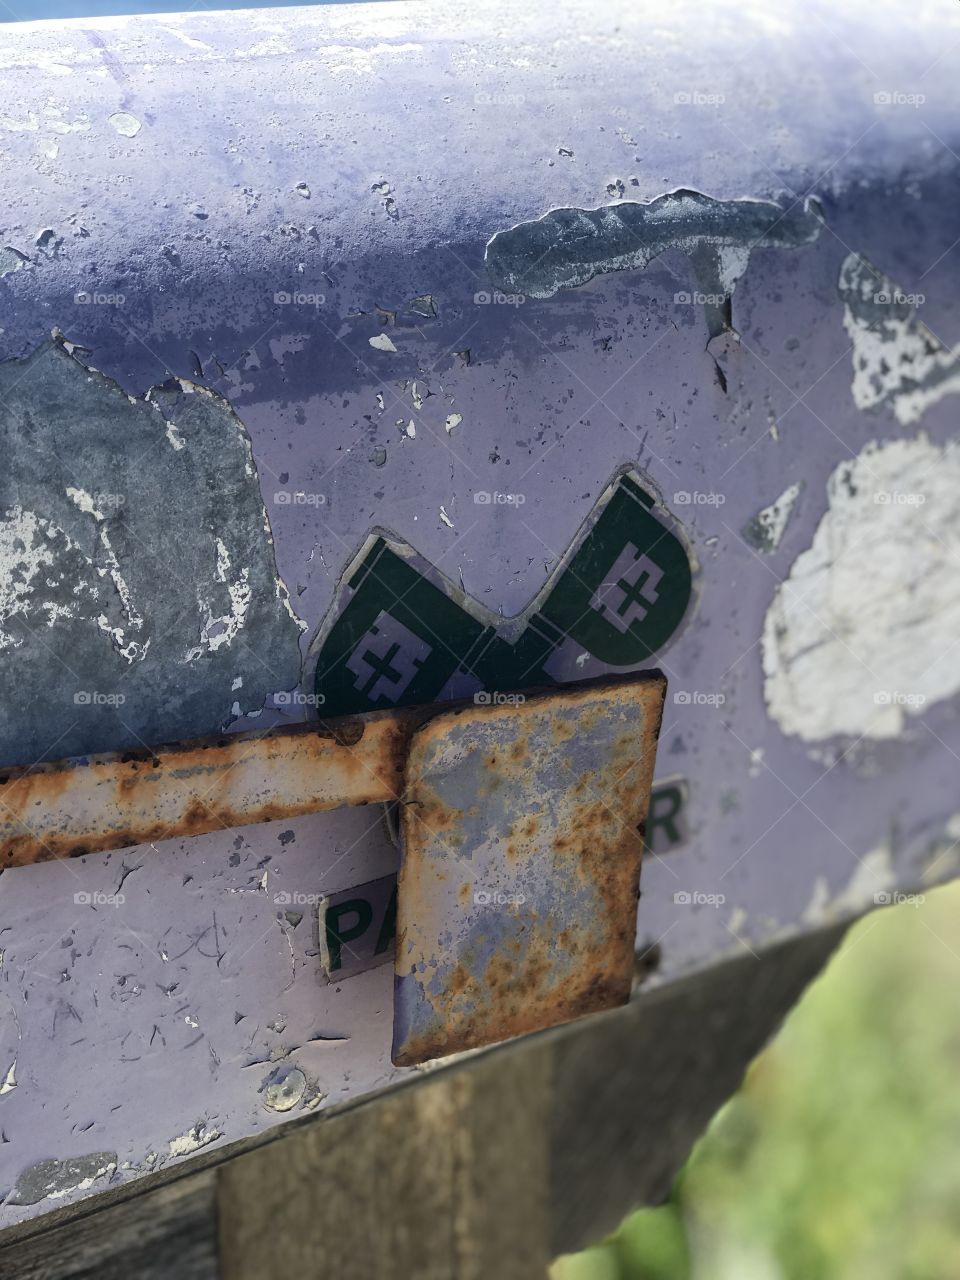 A closeup of the beauty of aging. A mailbox shows its battle wounds while standing the test of time against nature and the elements. 